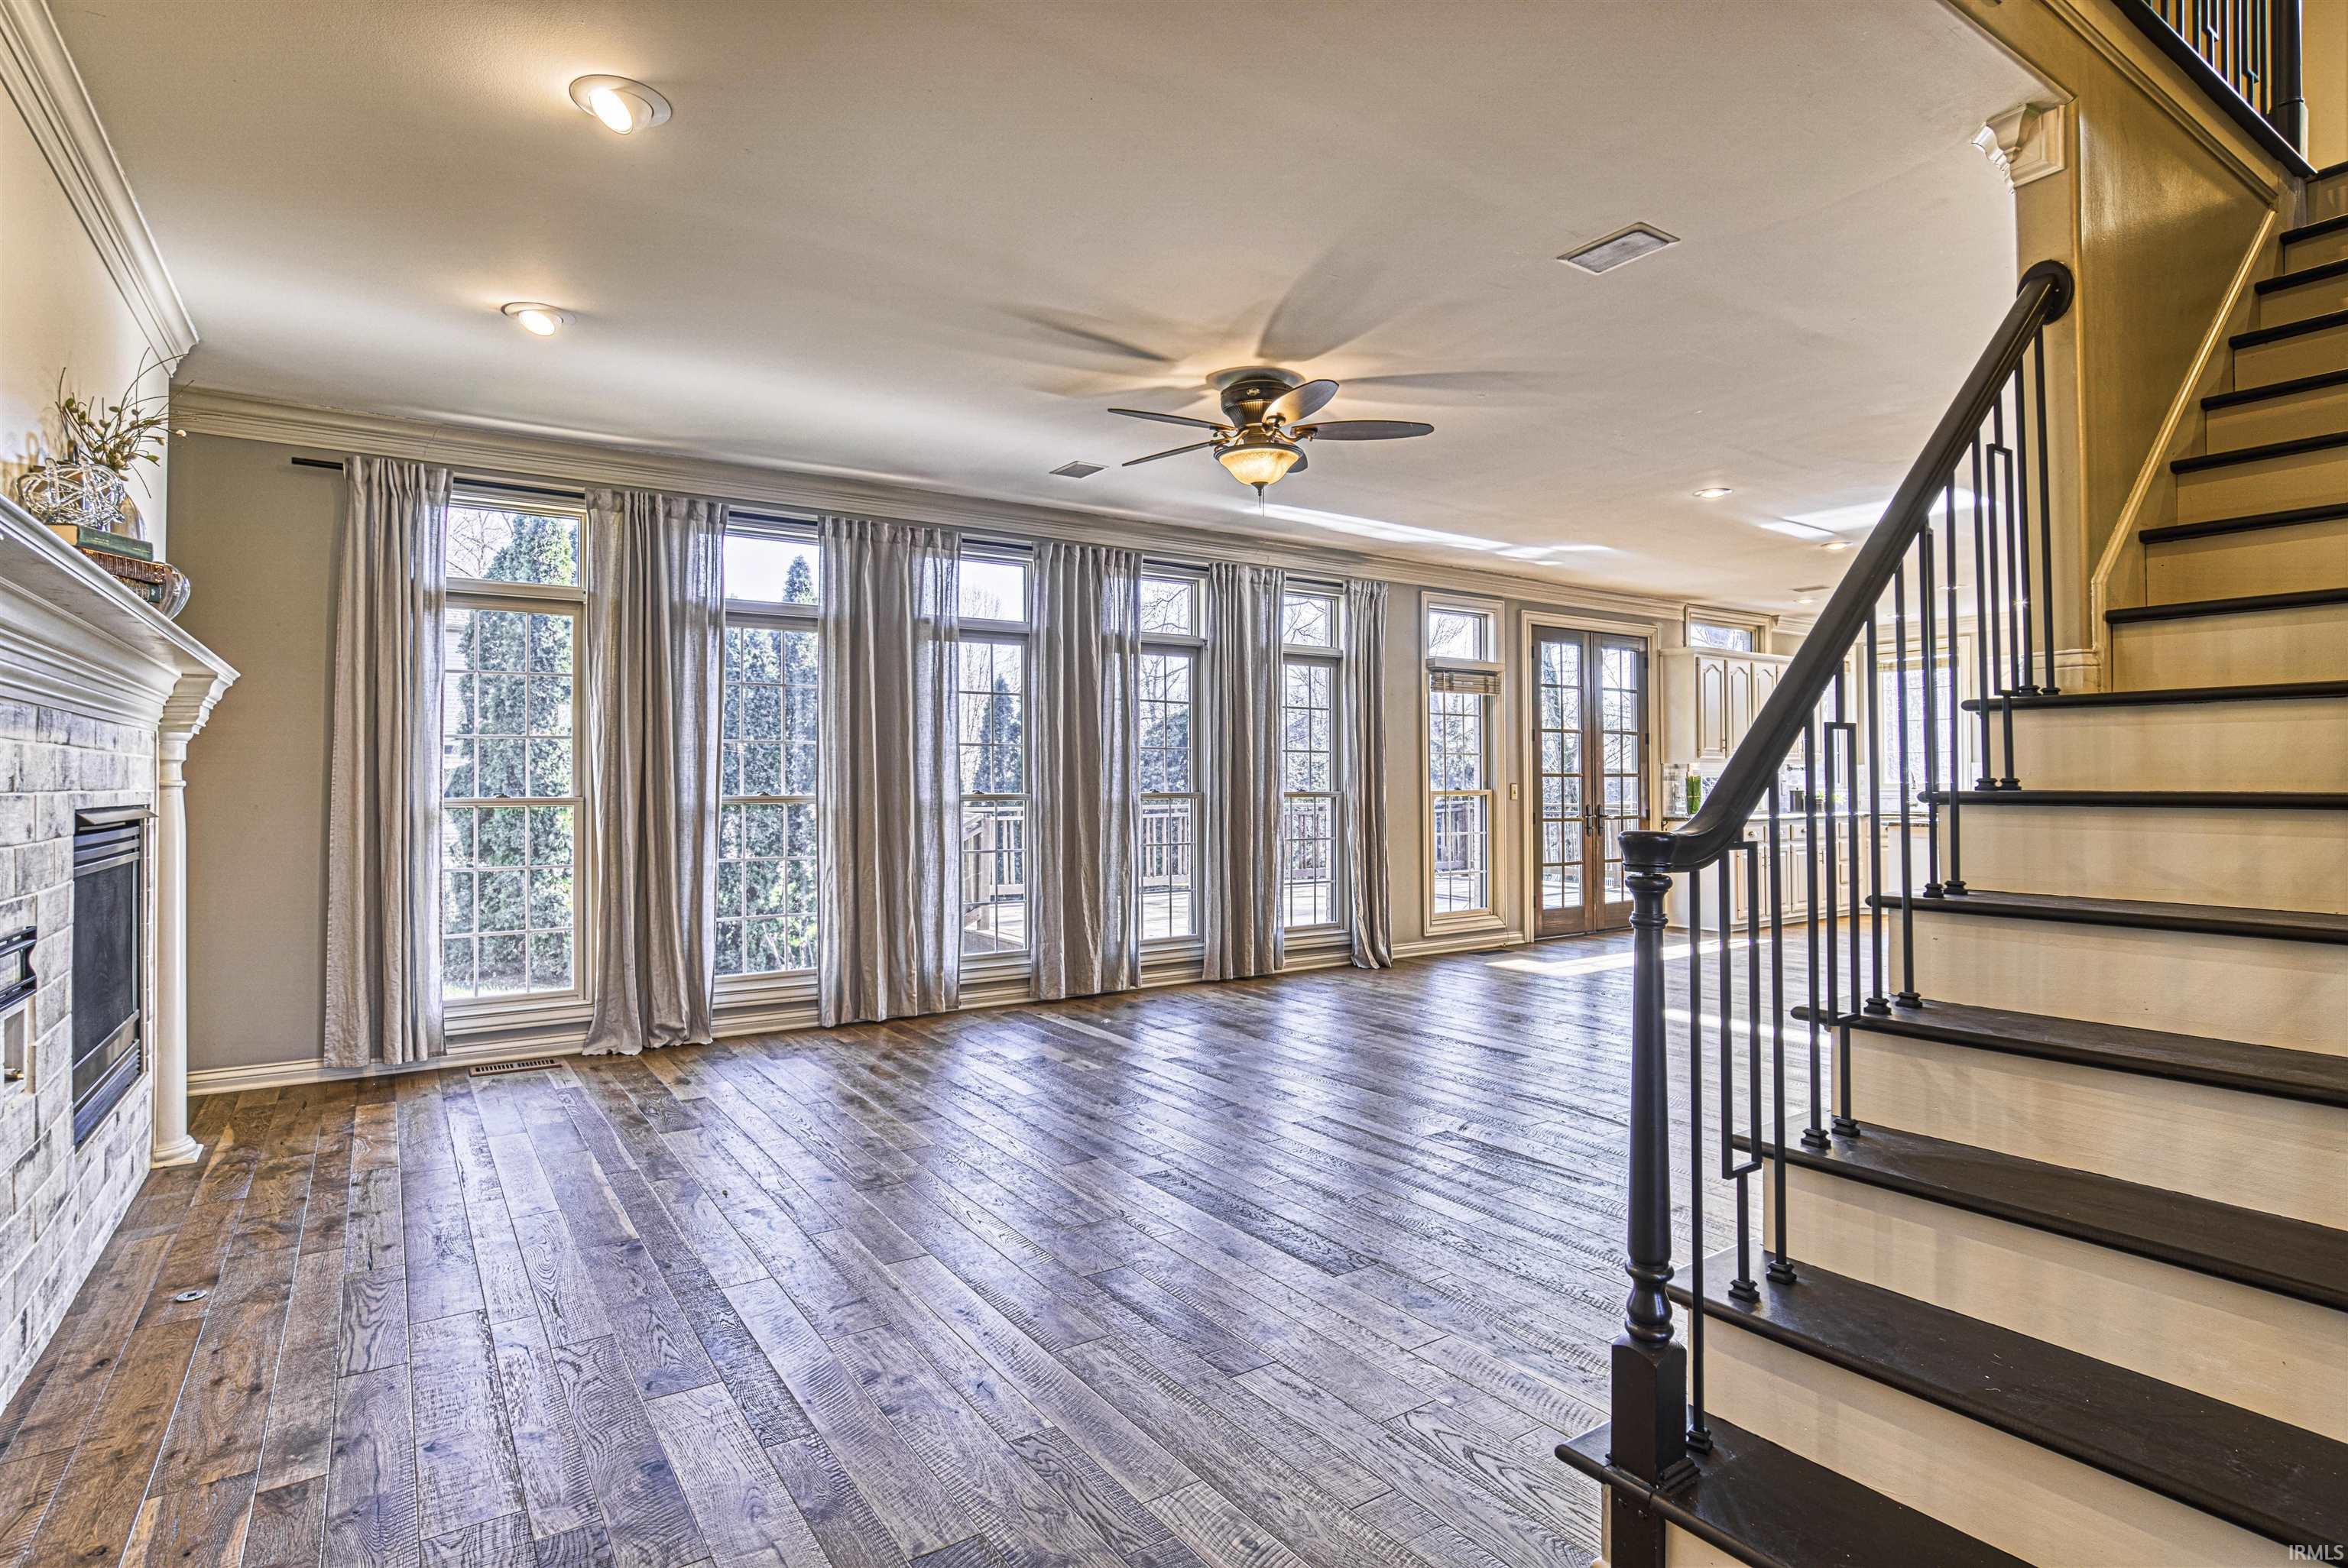 The foyer opens to a spacious great room with...